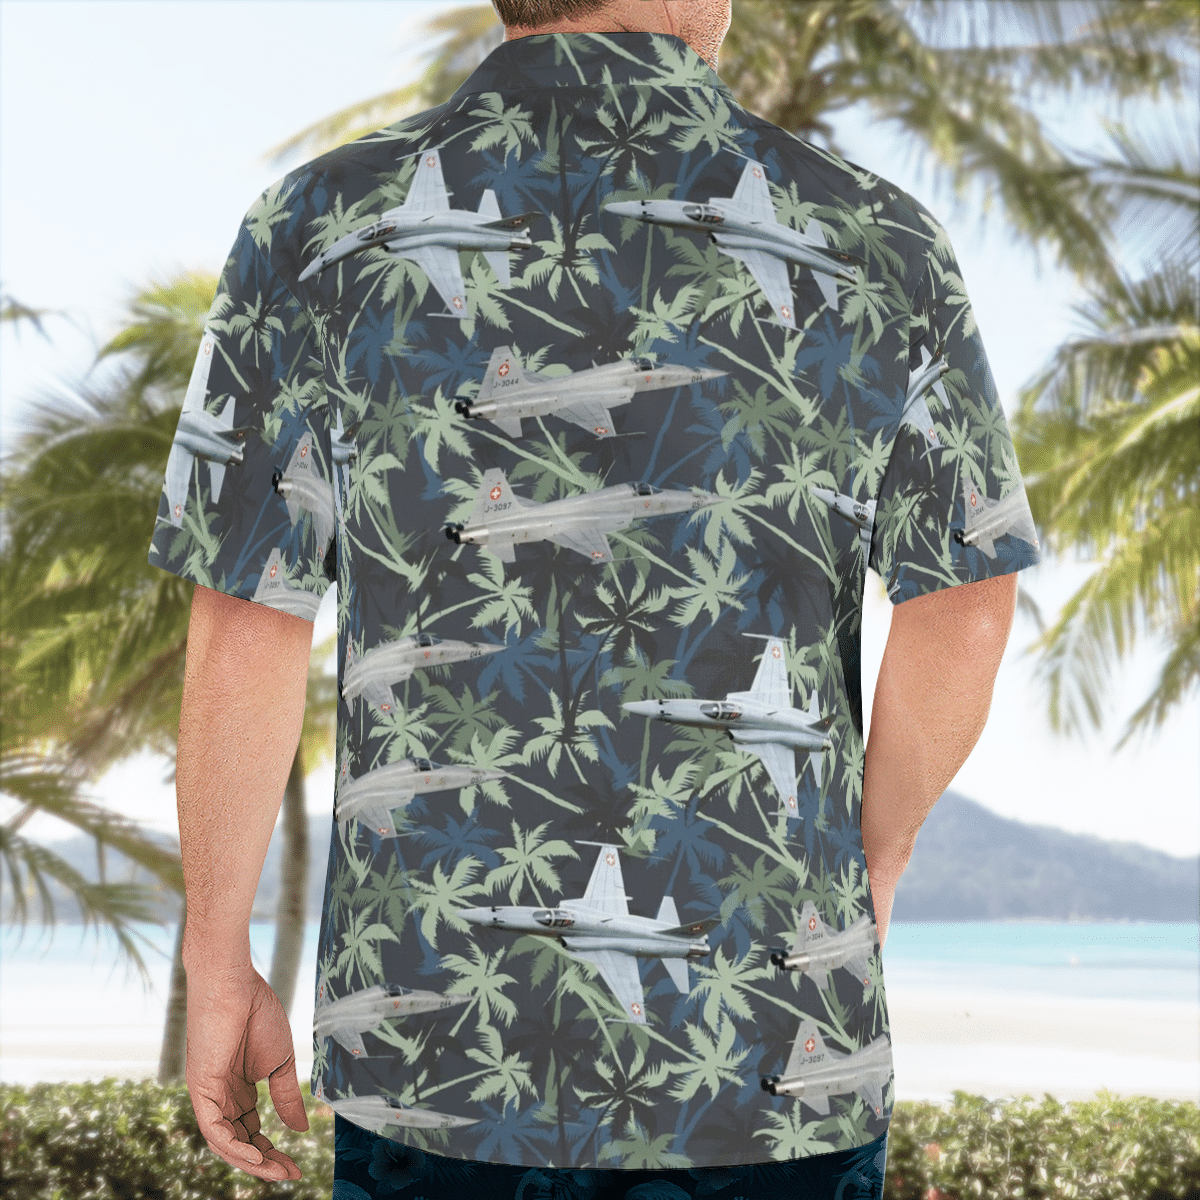 Top Hawaiian fashions that will give you a good look 442